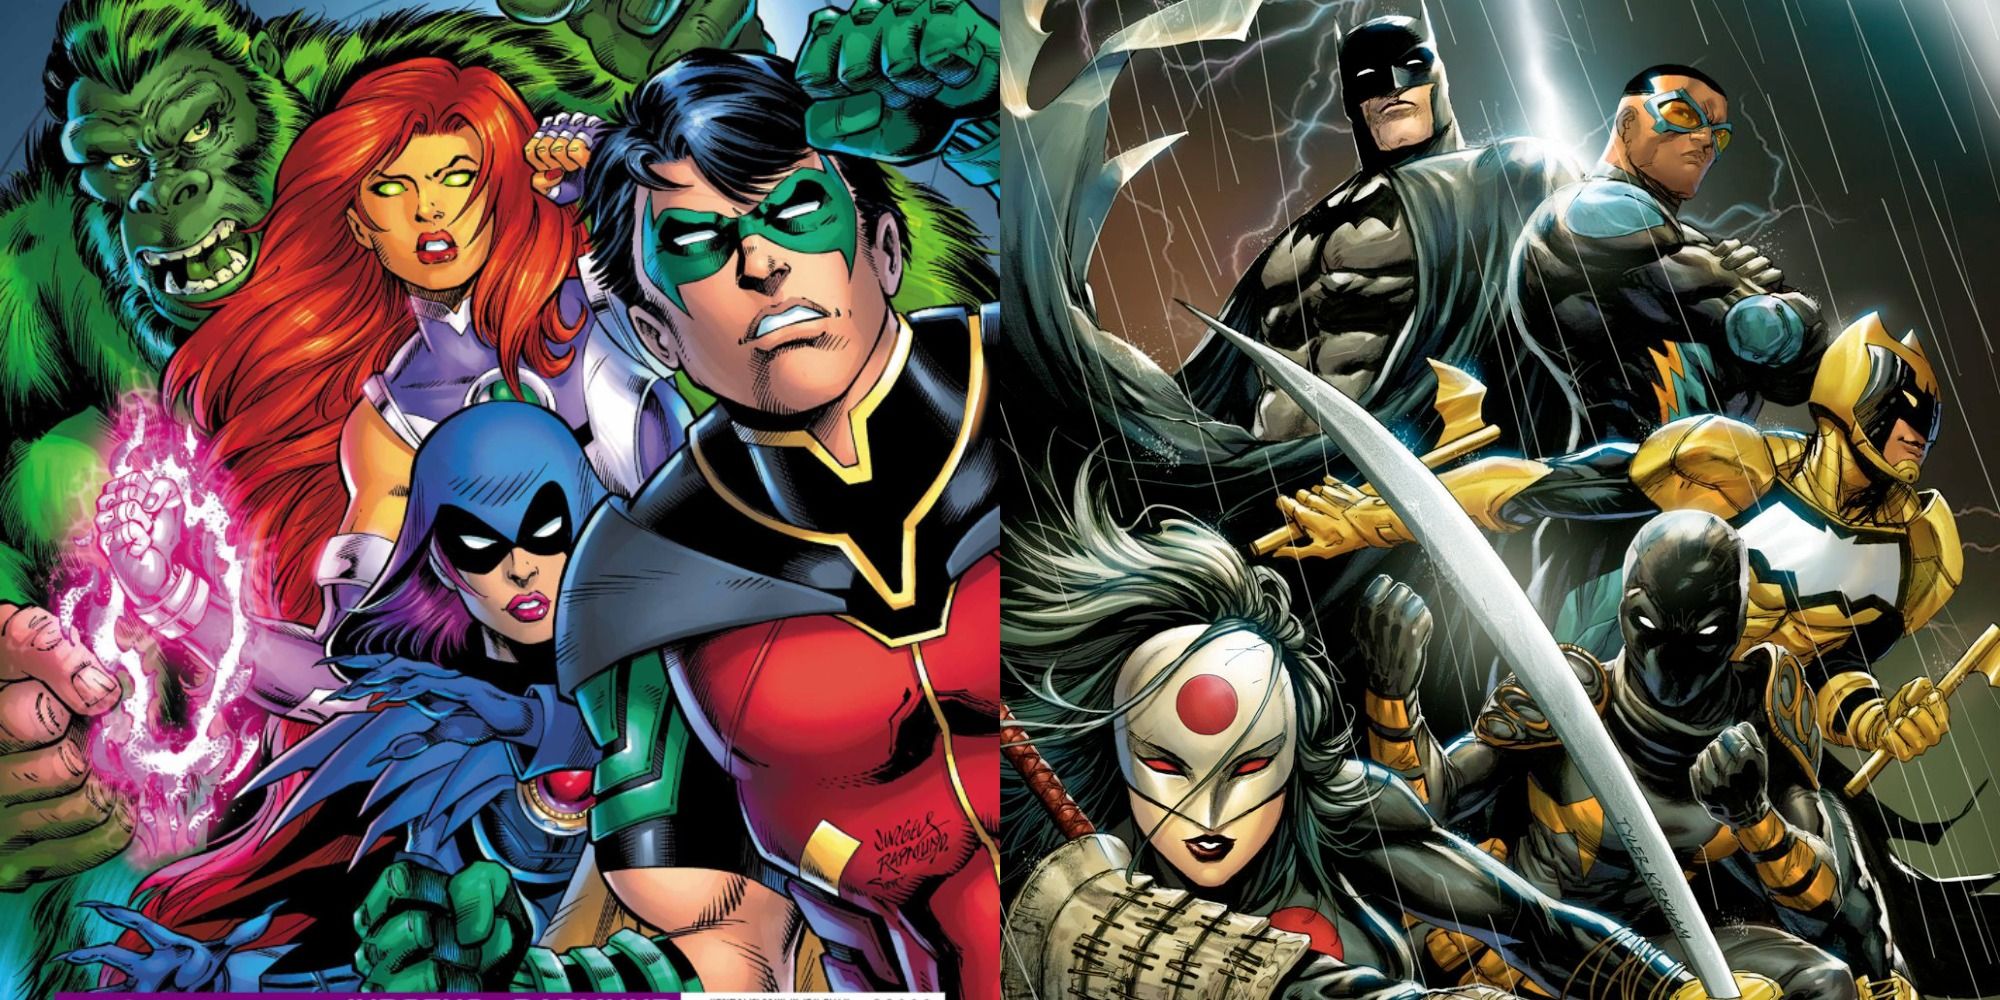 Split image showing the Teen Titans and the Outsiders